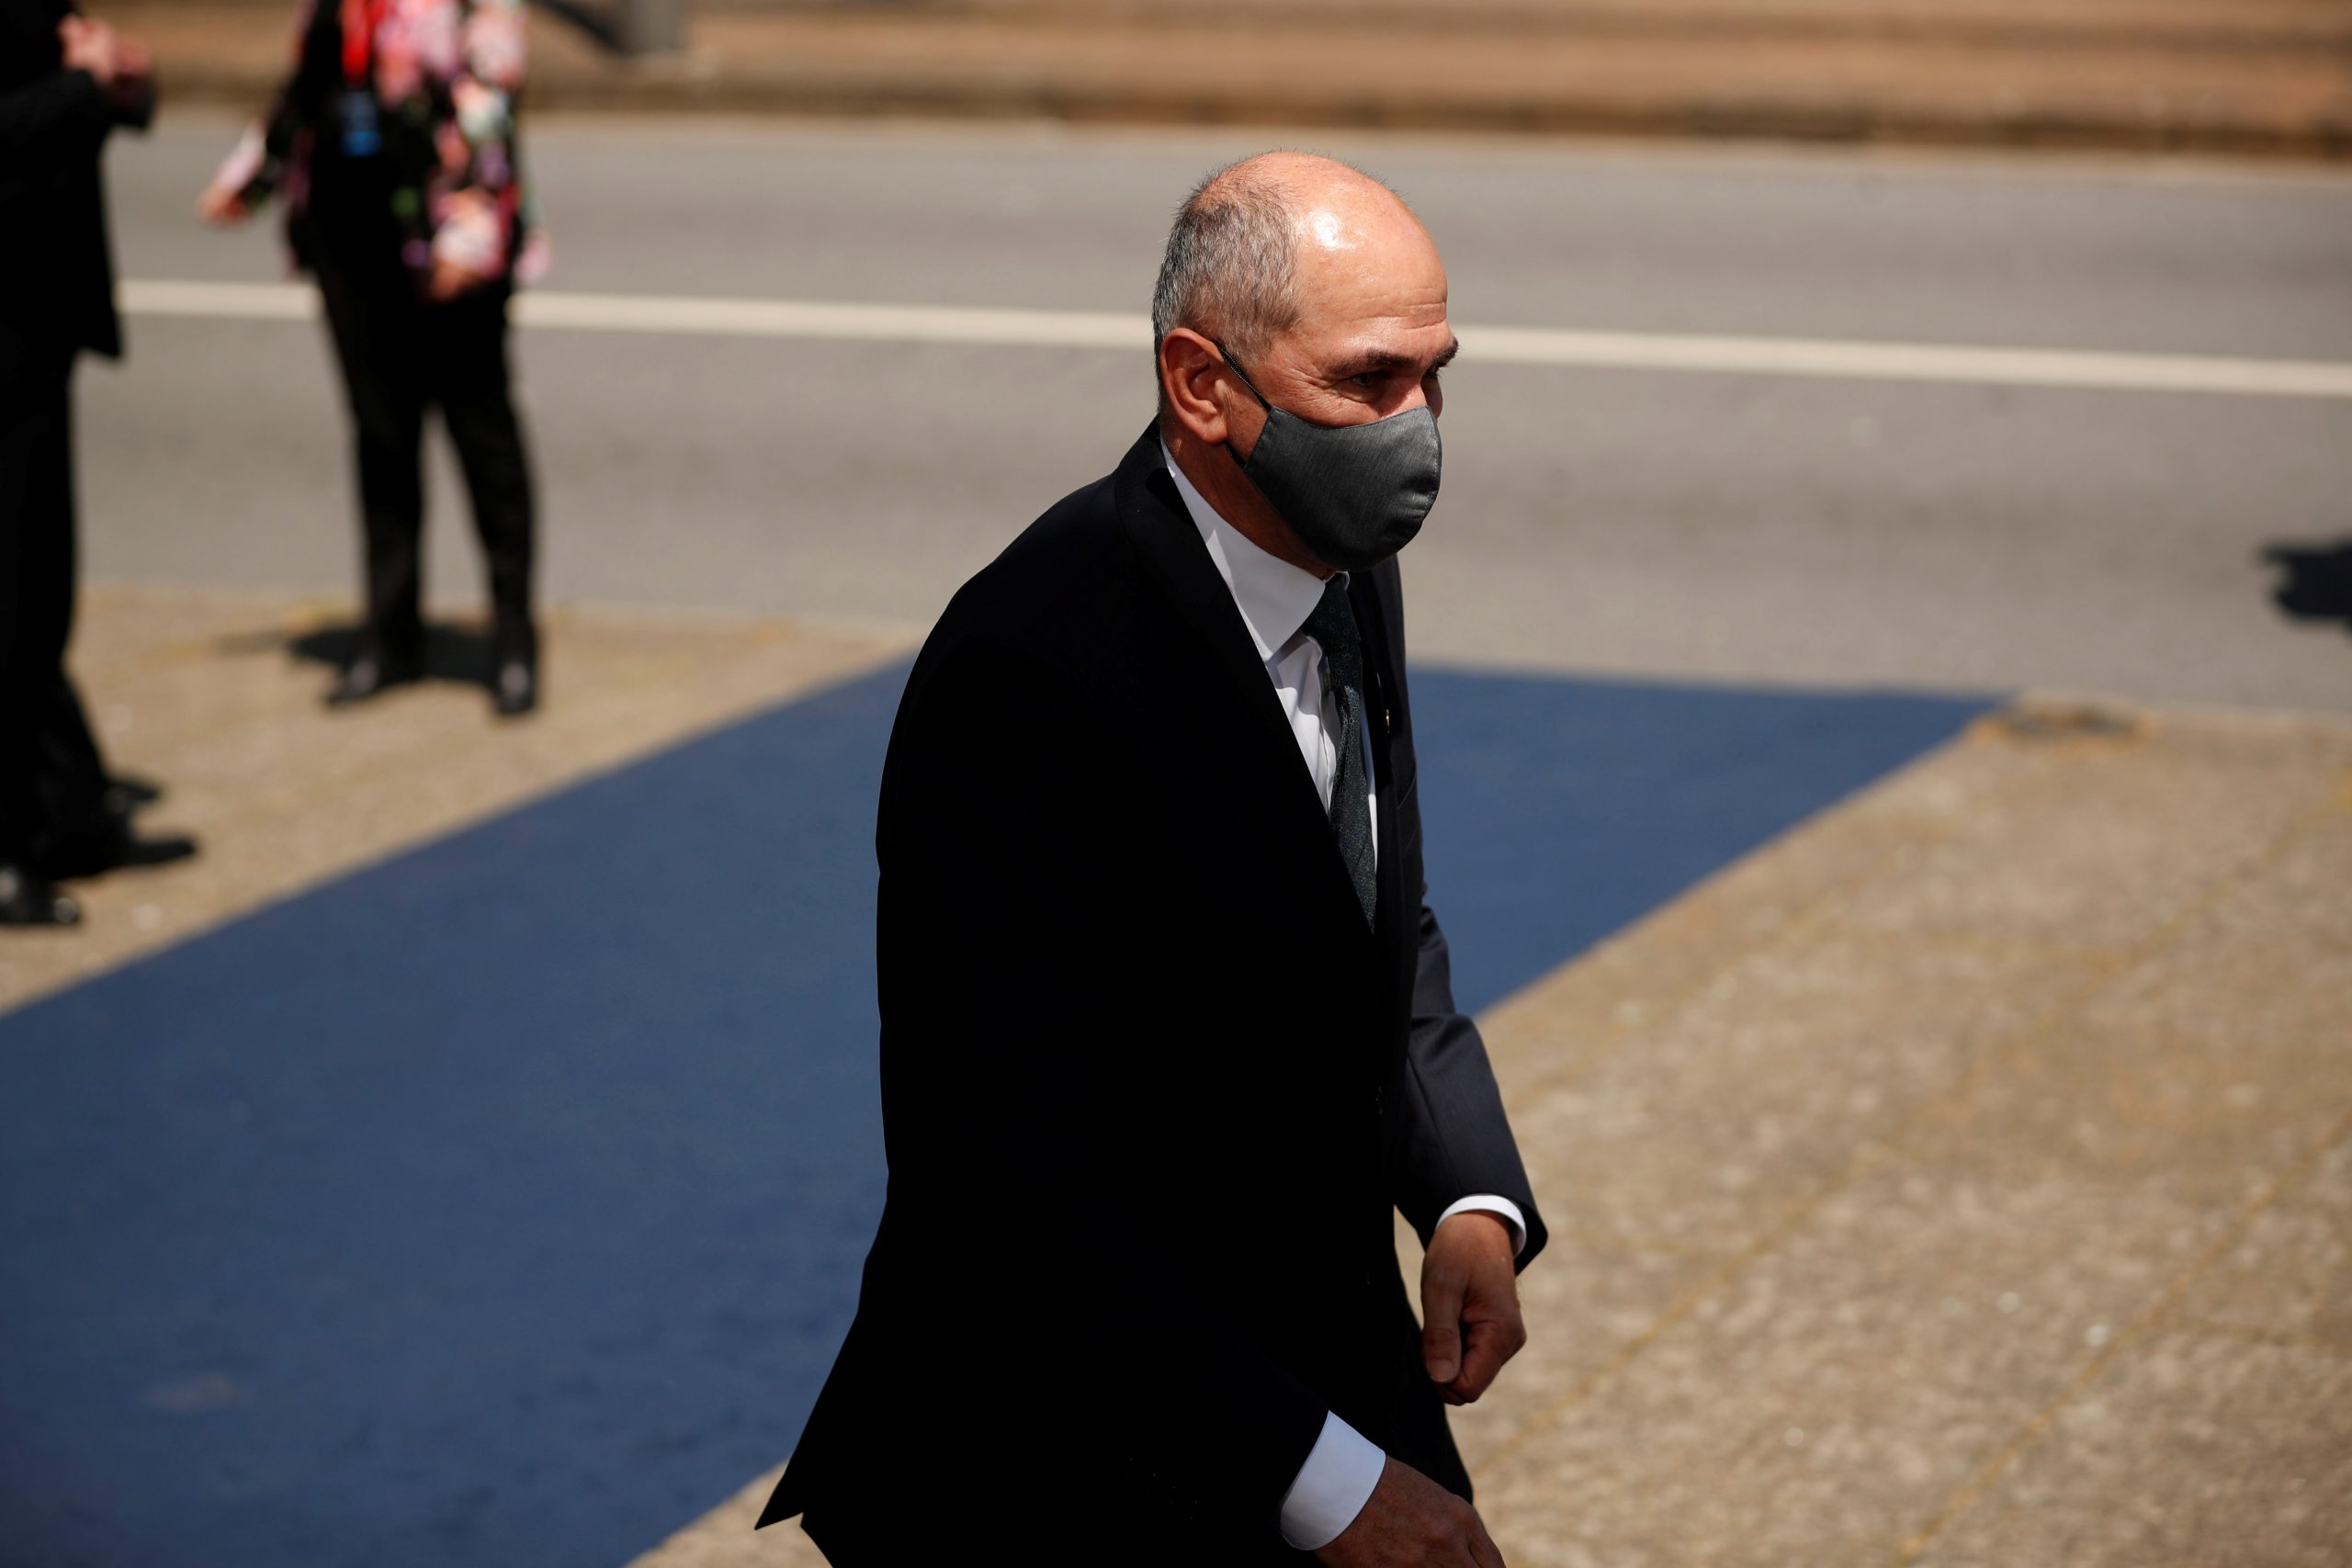 EU leaders meet to pledge commitment to social issues in post-pandemic world Slovenia's Prime Minister Janez Jansa arrives for an EU summit at the Alfandega do Porto Congress Center in Porto, Portugal May 7, 2021. Francisco Seco/Pool via REUTERS POOL